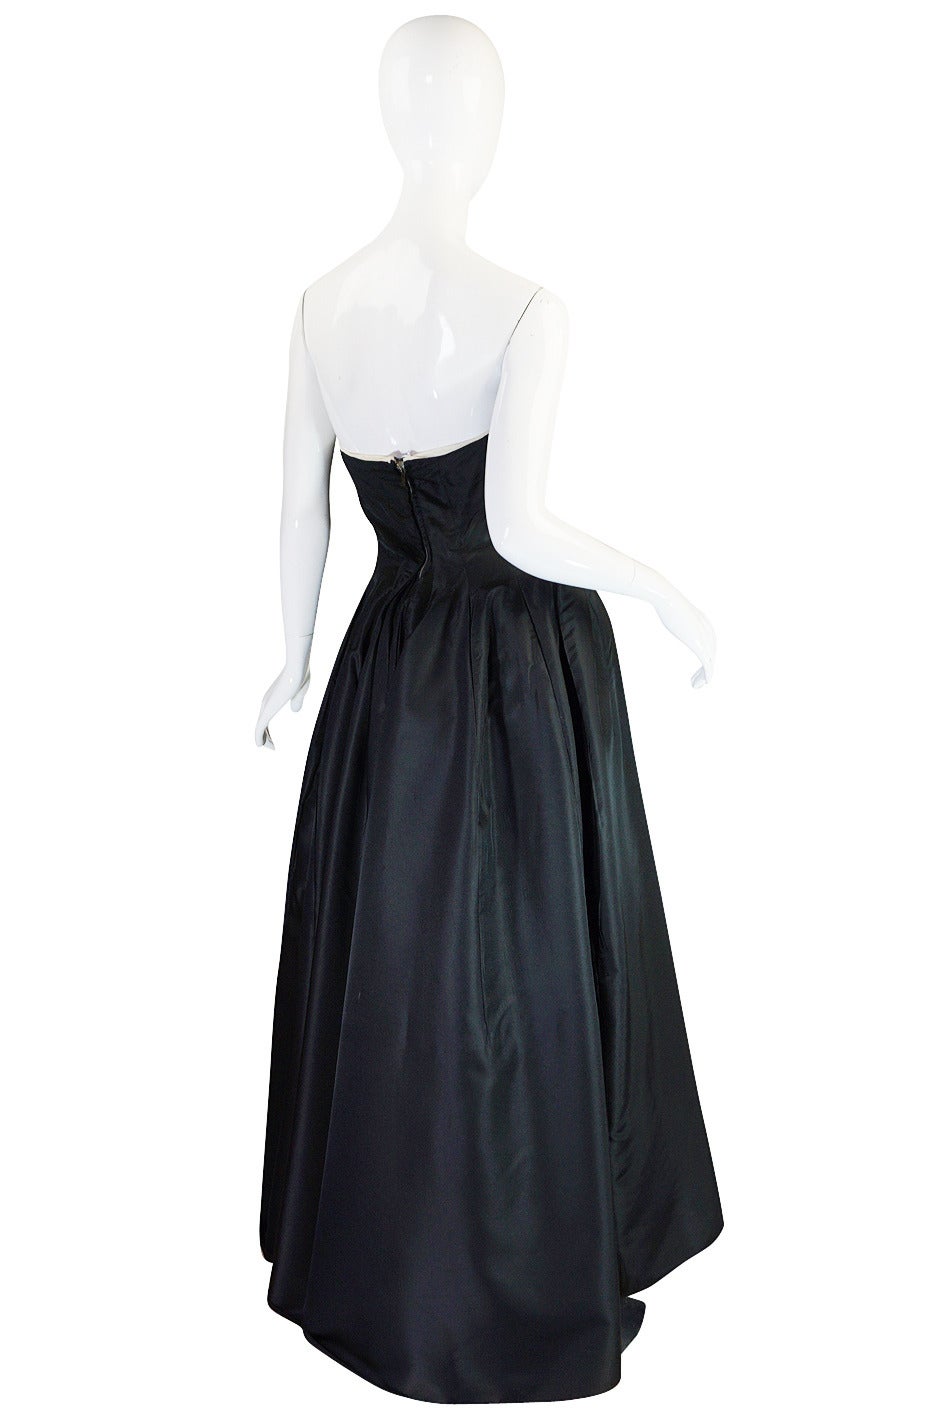 Beautiful 1950s Black Strapless Bonwit Teller Silk Gown In Excellent Condition For Sale In Rockwood, ON